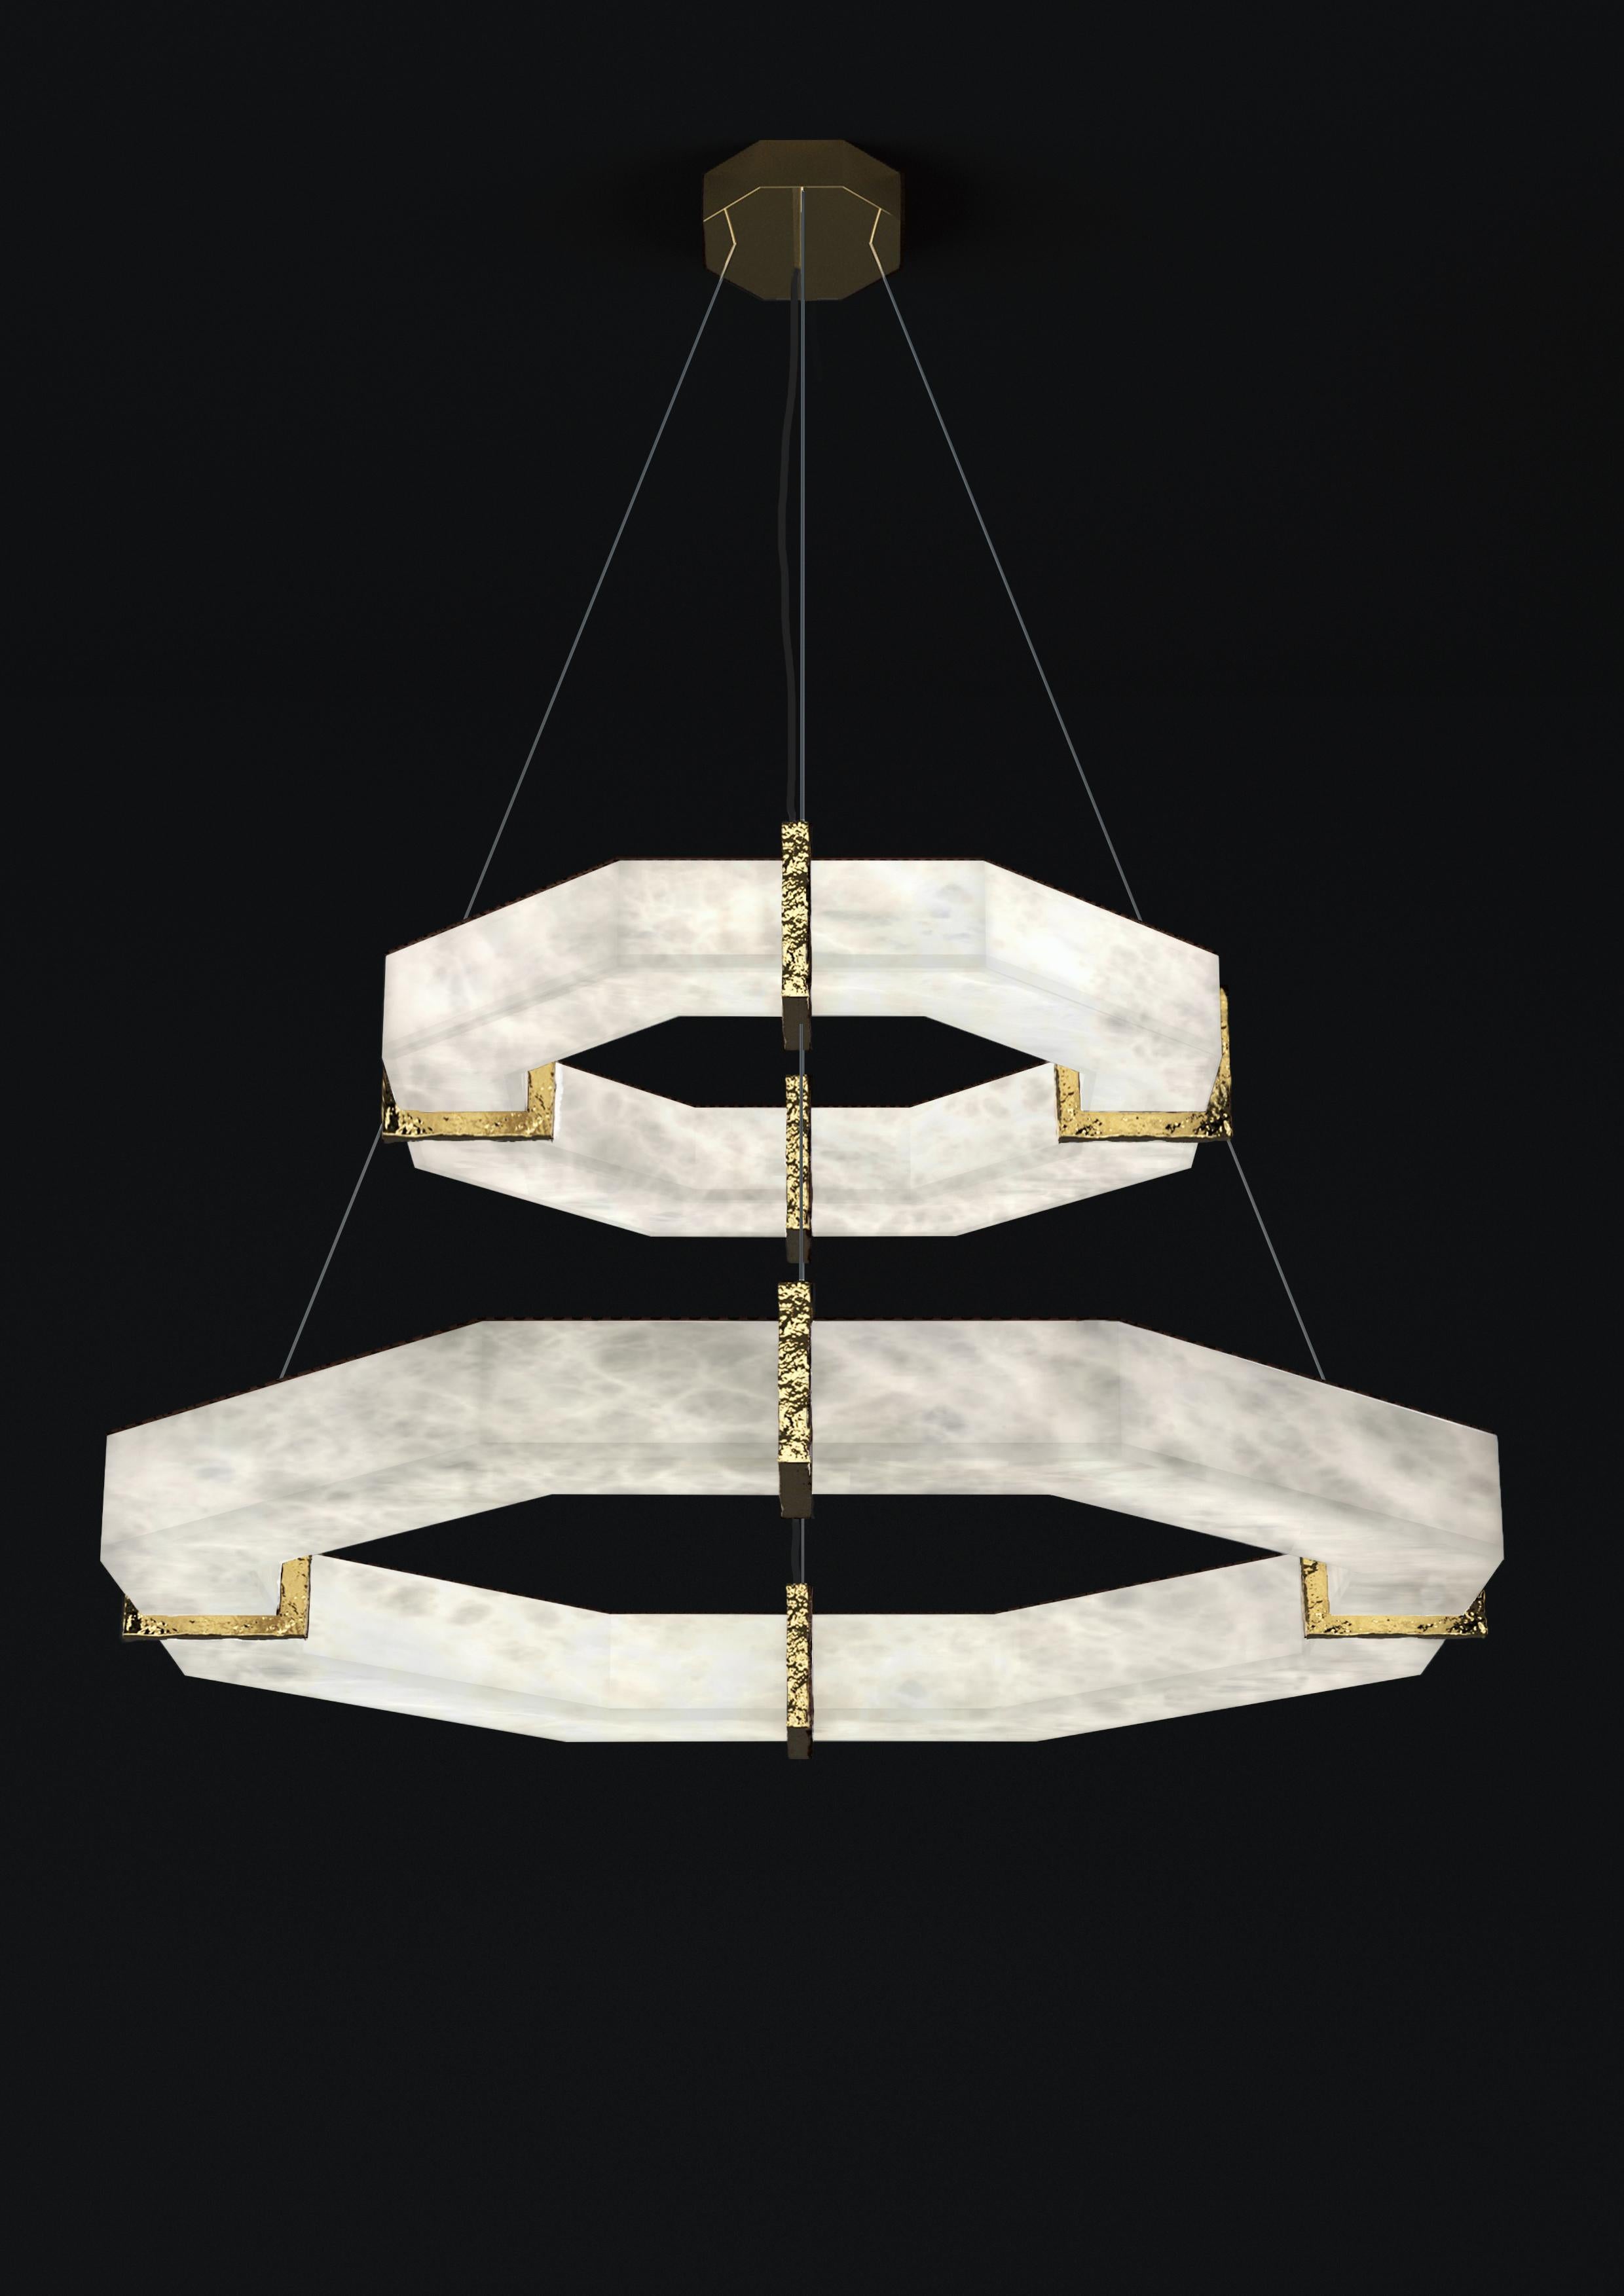 Efesto Shiny Gold Metal Double Pendant Lamp by Alabastro Italiano
Dimensions: D 80.5 x W 80.5 x H 36.5 cm.
Materials: White alabaster and metal.

Available in different finishes: Shiny Silver, Bronze, Brushed Brass, Ruggine of Florence, Brushed